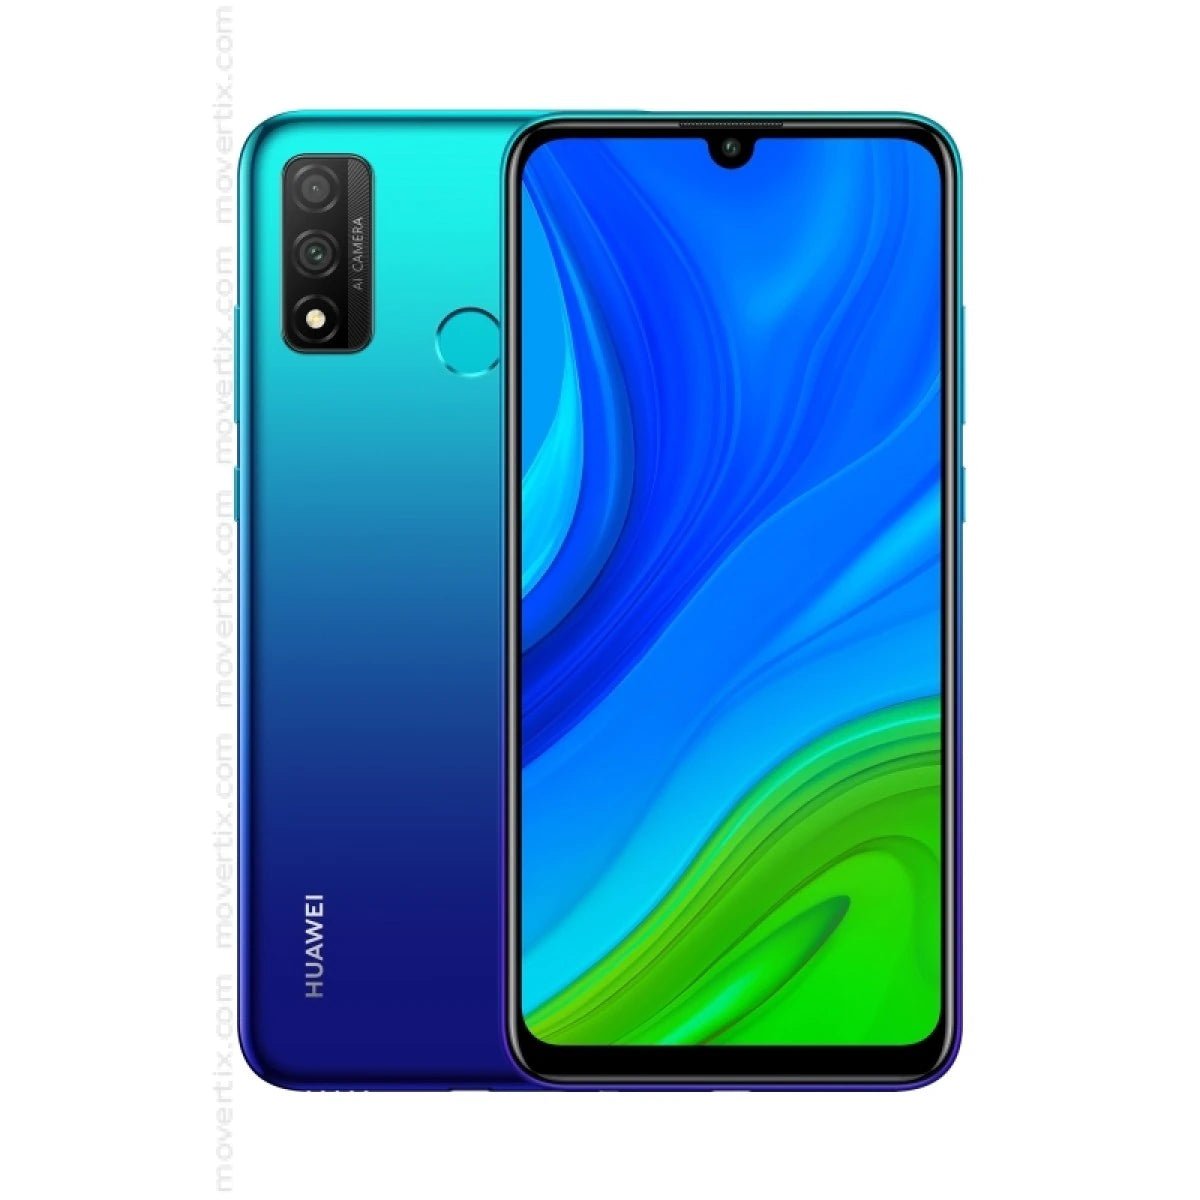 Huawei P Smart 2020 - LCDeal Kft.